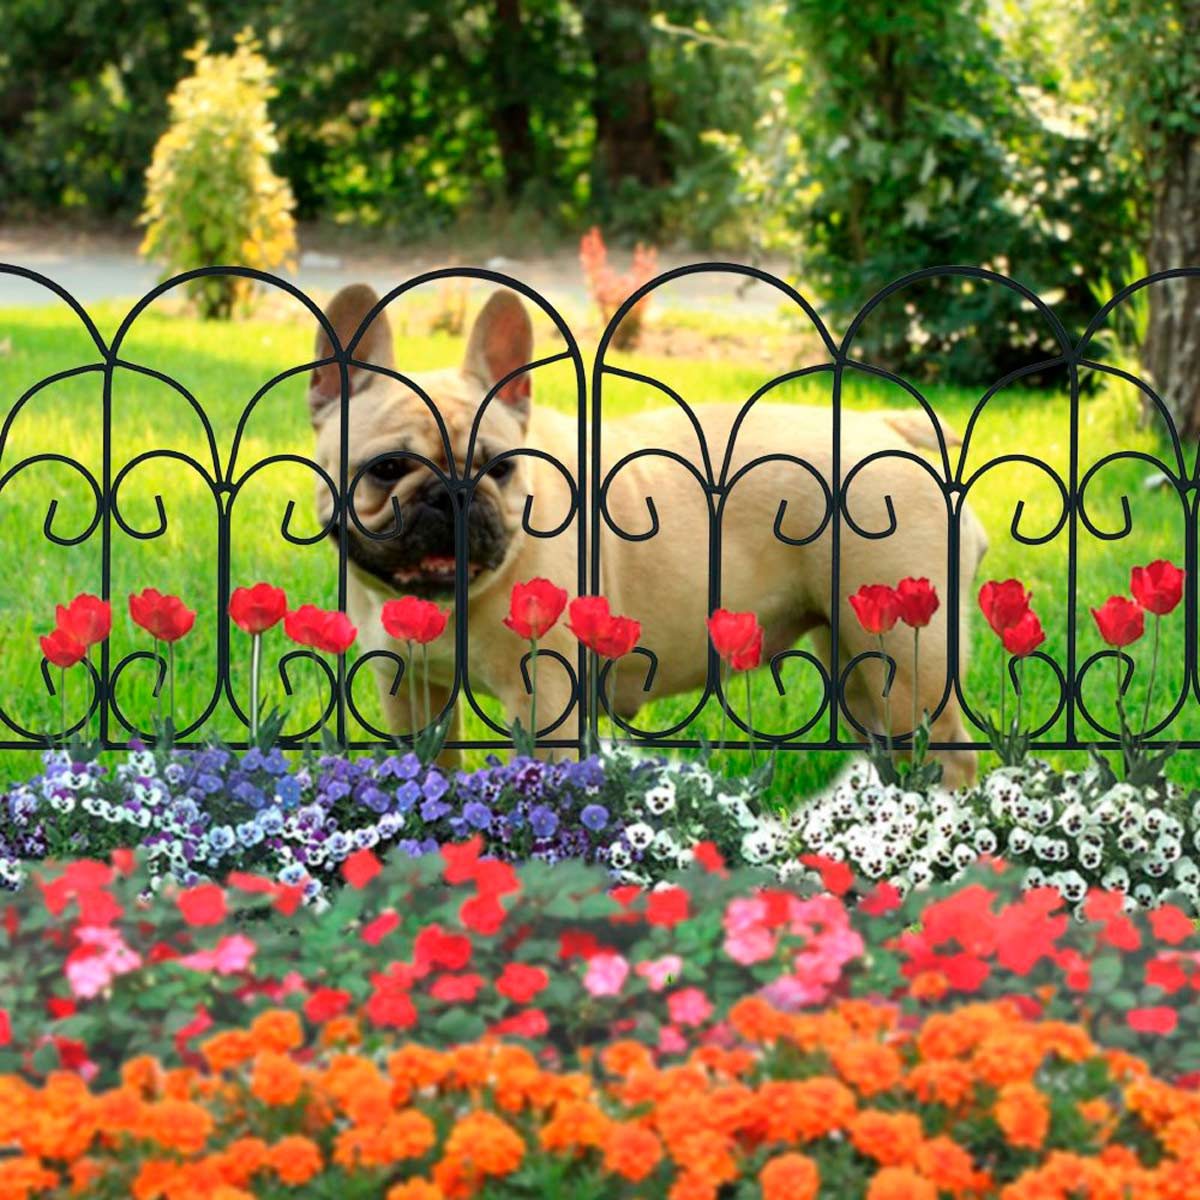 10 Flower Bed Fencing Ideas to Spruce Up Your Landscape